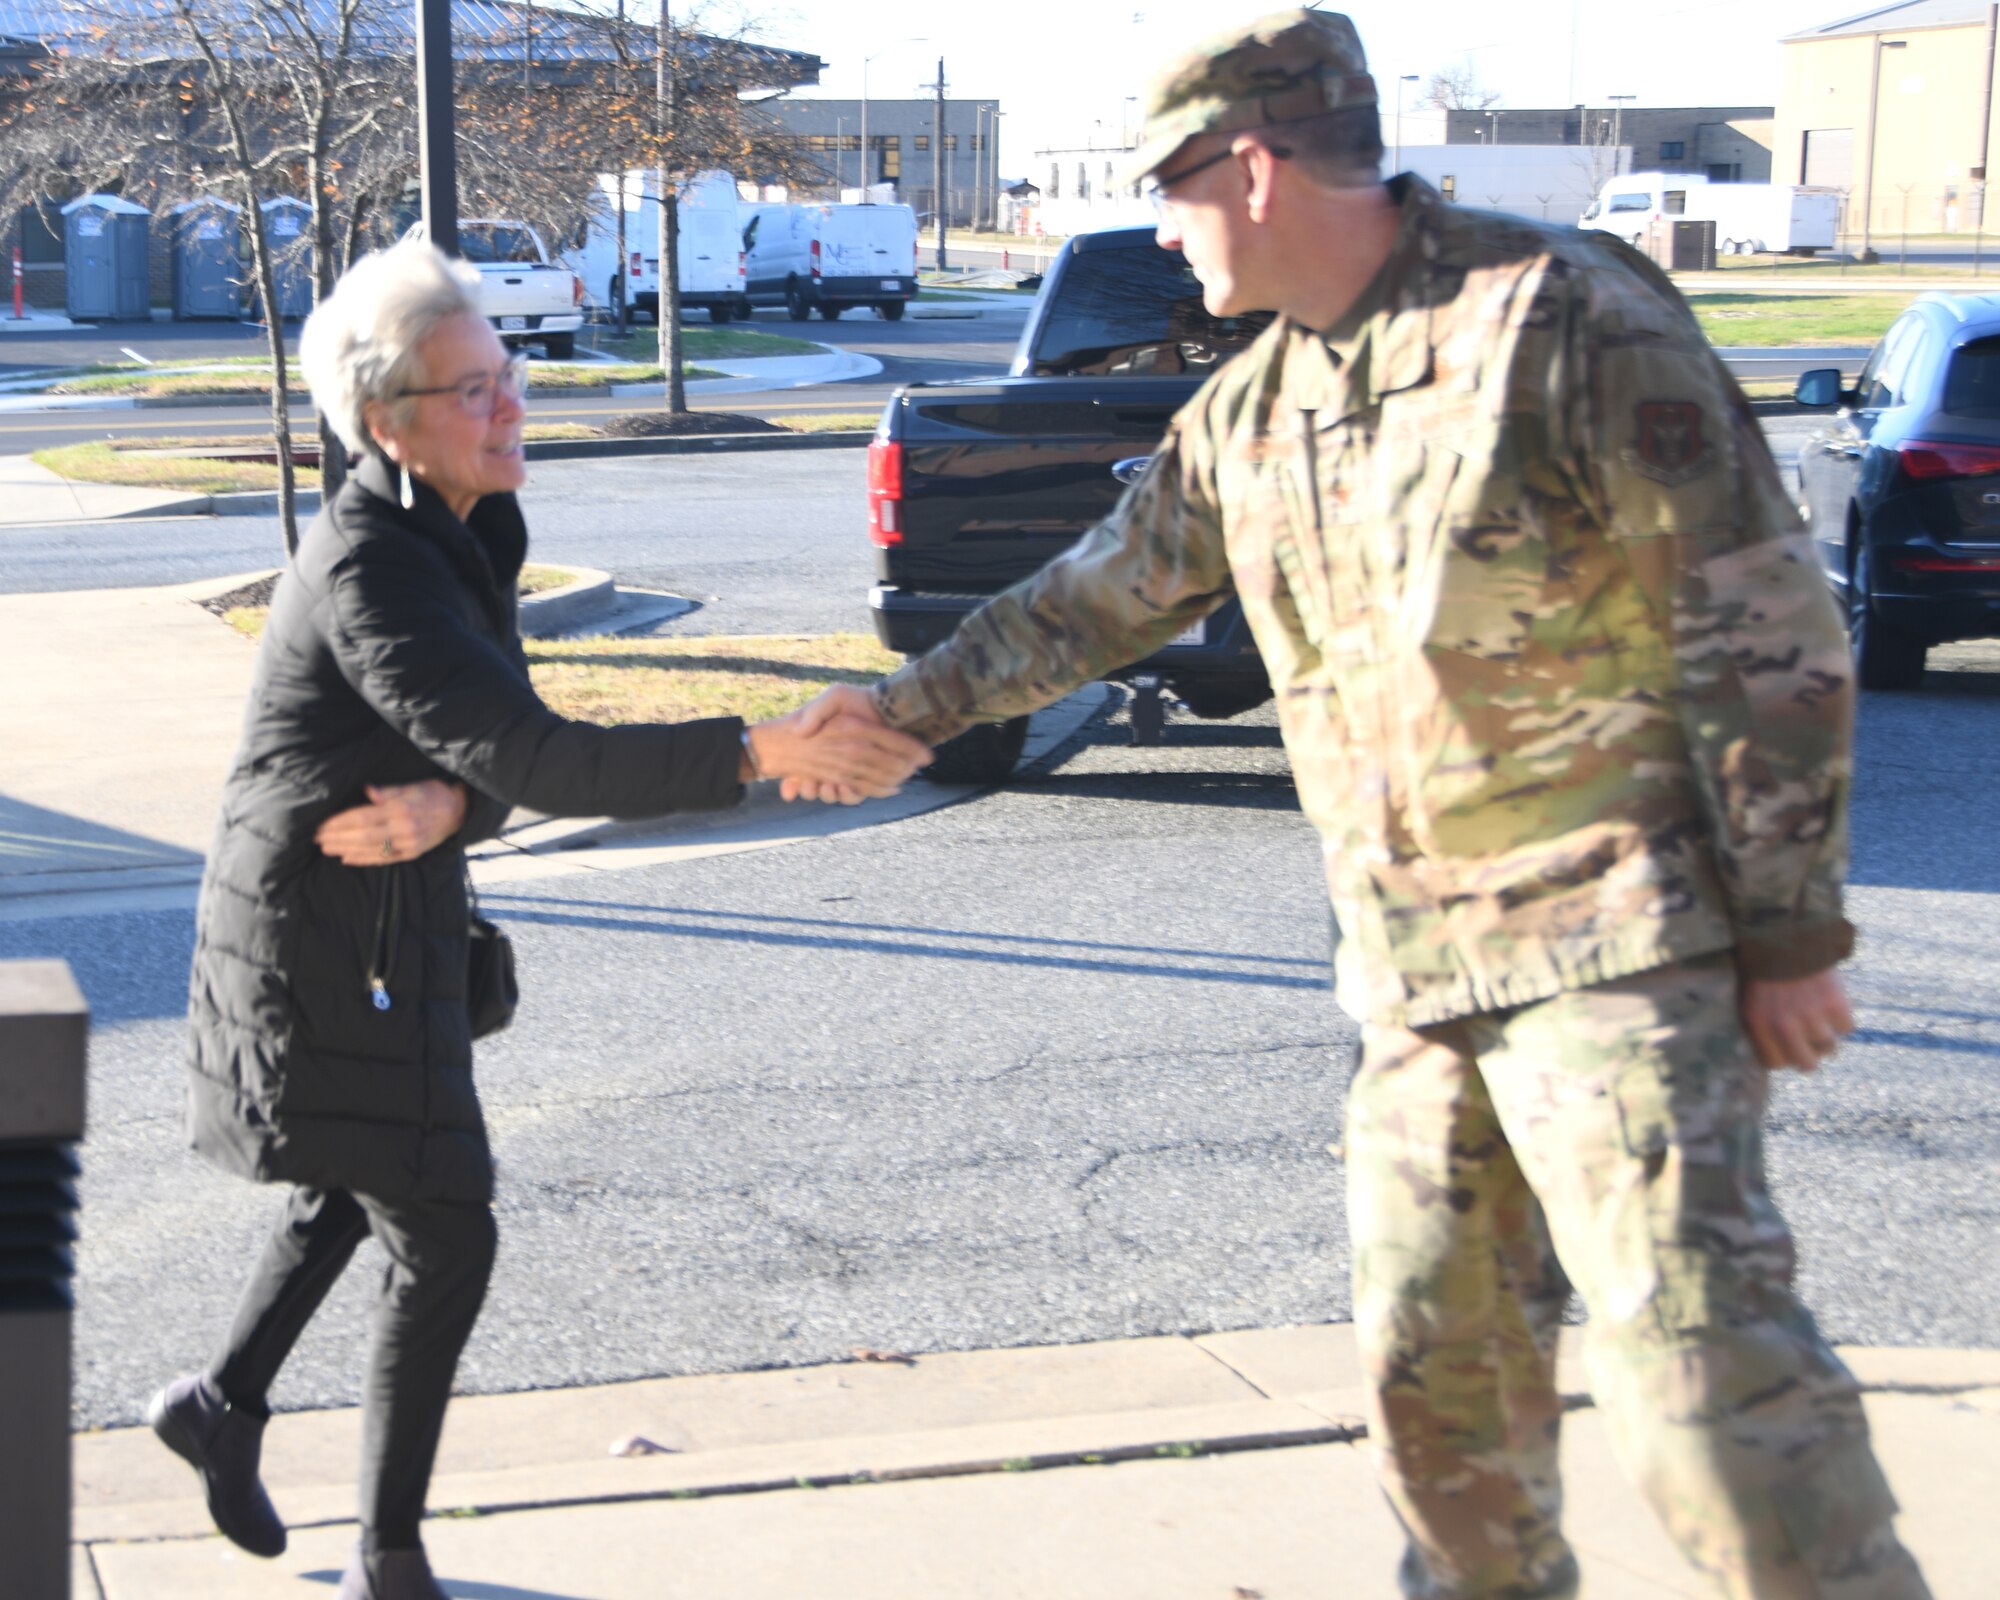 Col. Greg Buchanan, 459th Air Refueling Wing Commander, greets Defense Health Board president, Karen Guice, M.D., upon arrival for the board’s visit to the 459th ARW on Dec. 1, 2022. The DHB requested a visit to Joint Base Andrews for an opportunity to see the pivotal role medical units at Joint Base Andrews play in the global patient movement pipeline and the challenges faced in supporting this critical effort. (U.S. Air Force Photo by Maj. Tim Smith)